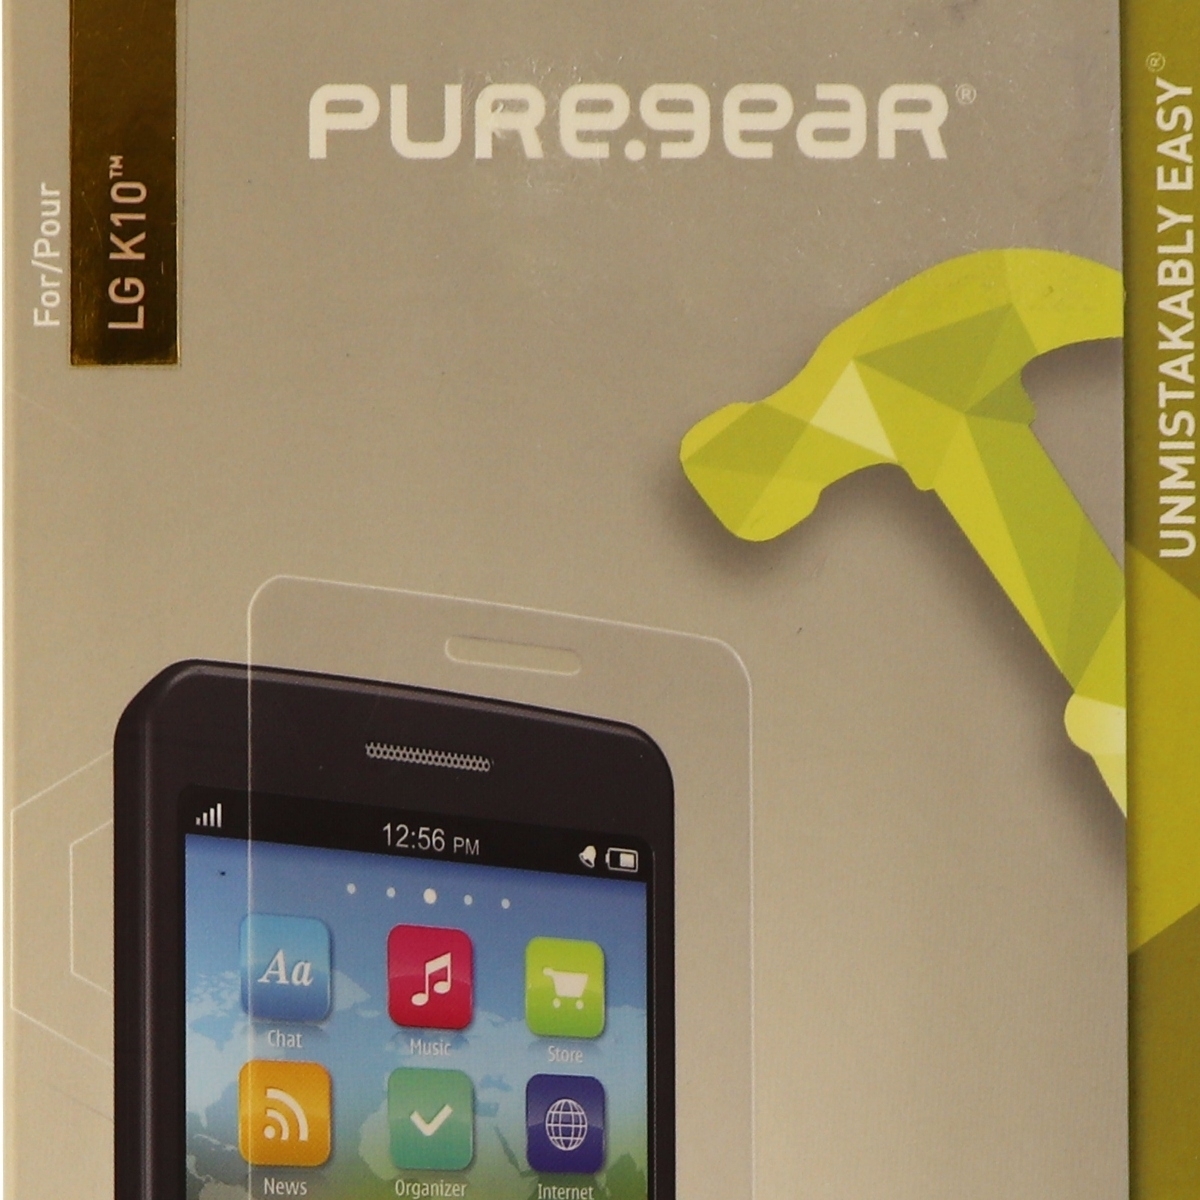 PureGear Extreme Impact Screen Protector With Alignment Tray For LG K10 - Clear